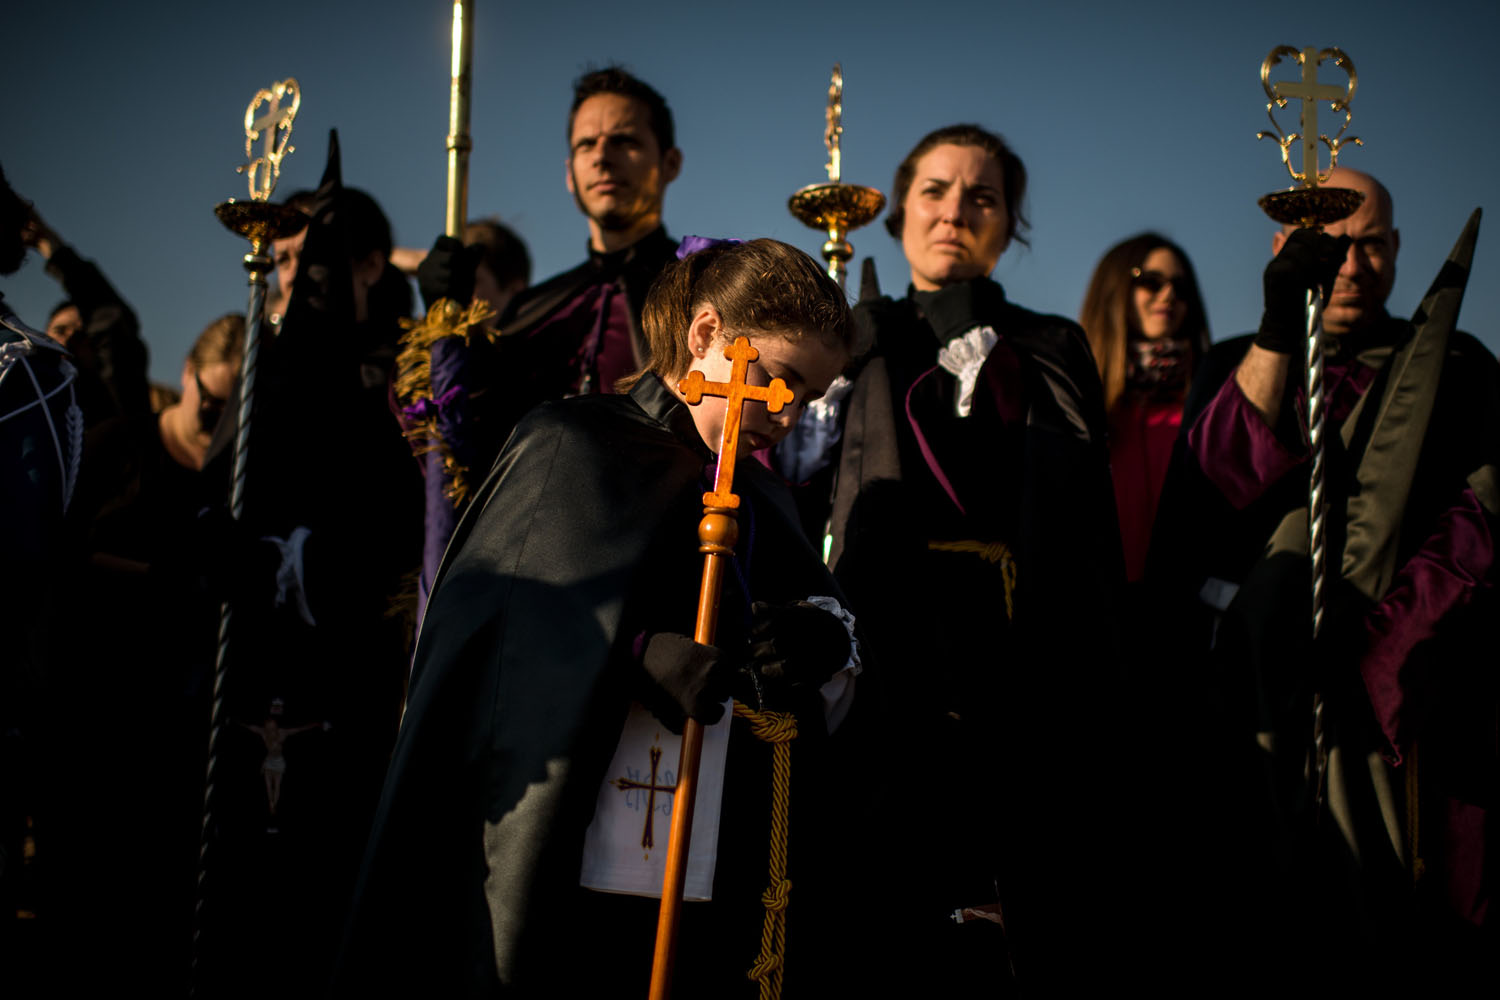 Holy Week Procession In Valencia